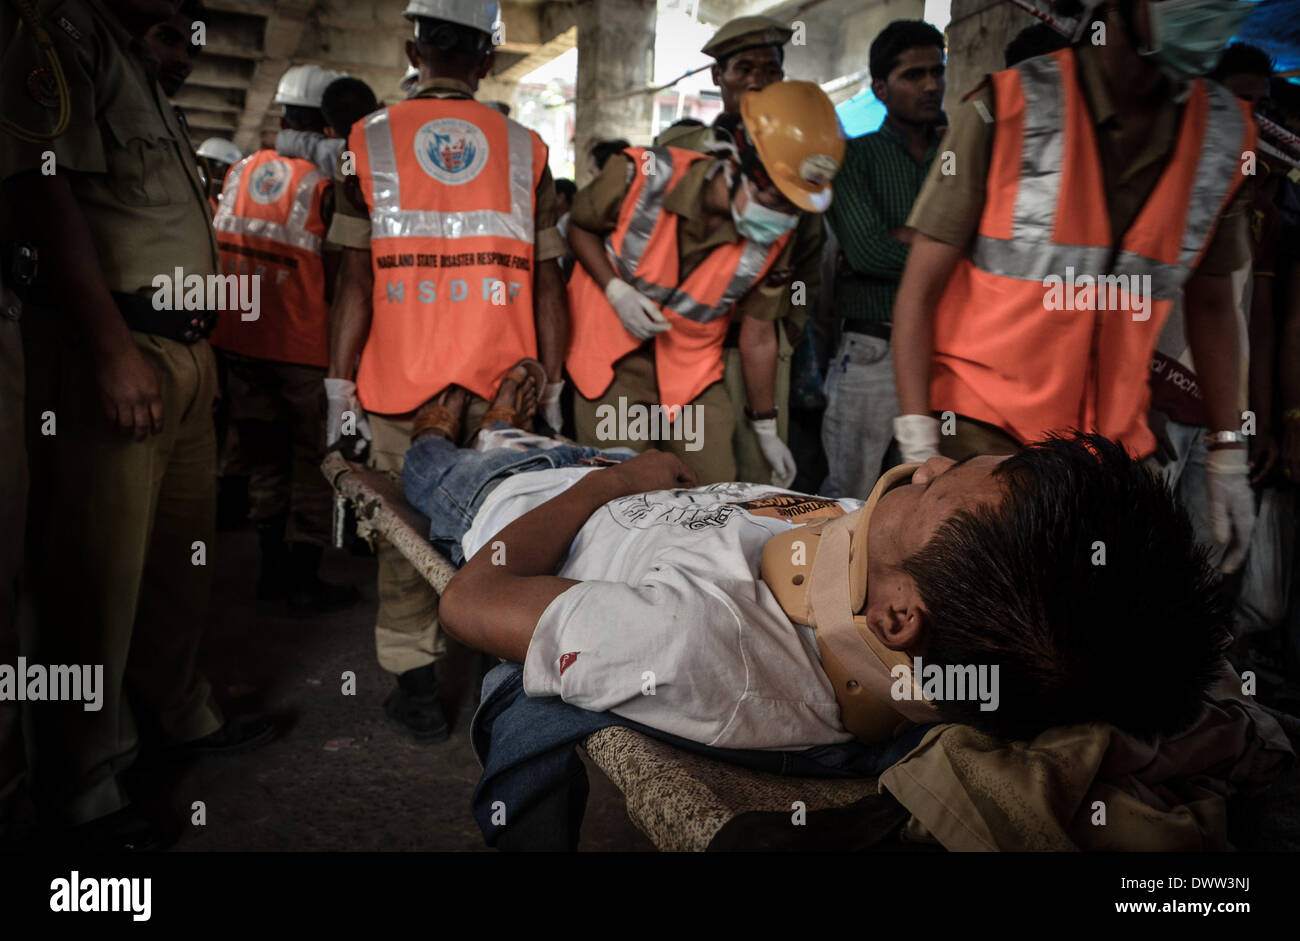 Dimapur, India. 13th Mar, 2014. Nagaland State Disaster Response Force (NSDRF) carries a man in a stretcher pretending to be injured as onlookers watch during an earthquake mock drill in Dimapur, India north eastern state of Nagaland on Thursday, March 13, 2014. The entire north east India are exercising earthquake mock drill, also one of the biggest mock drill in South East Asia aiming to assess multi-state disaster preparedness, for the fear of 1897's 8.7 magnitude Shillong earthquake replication. Credit:  ZUMA Press, Inc./Alamy Live News Stock Photo